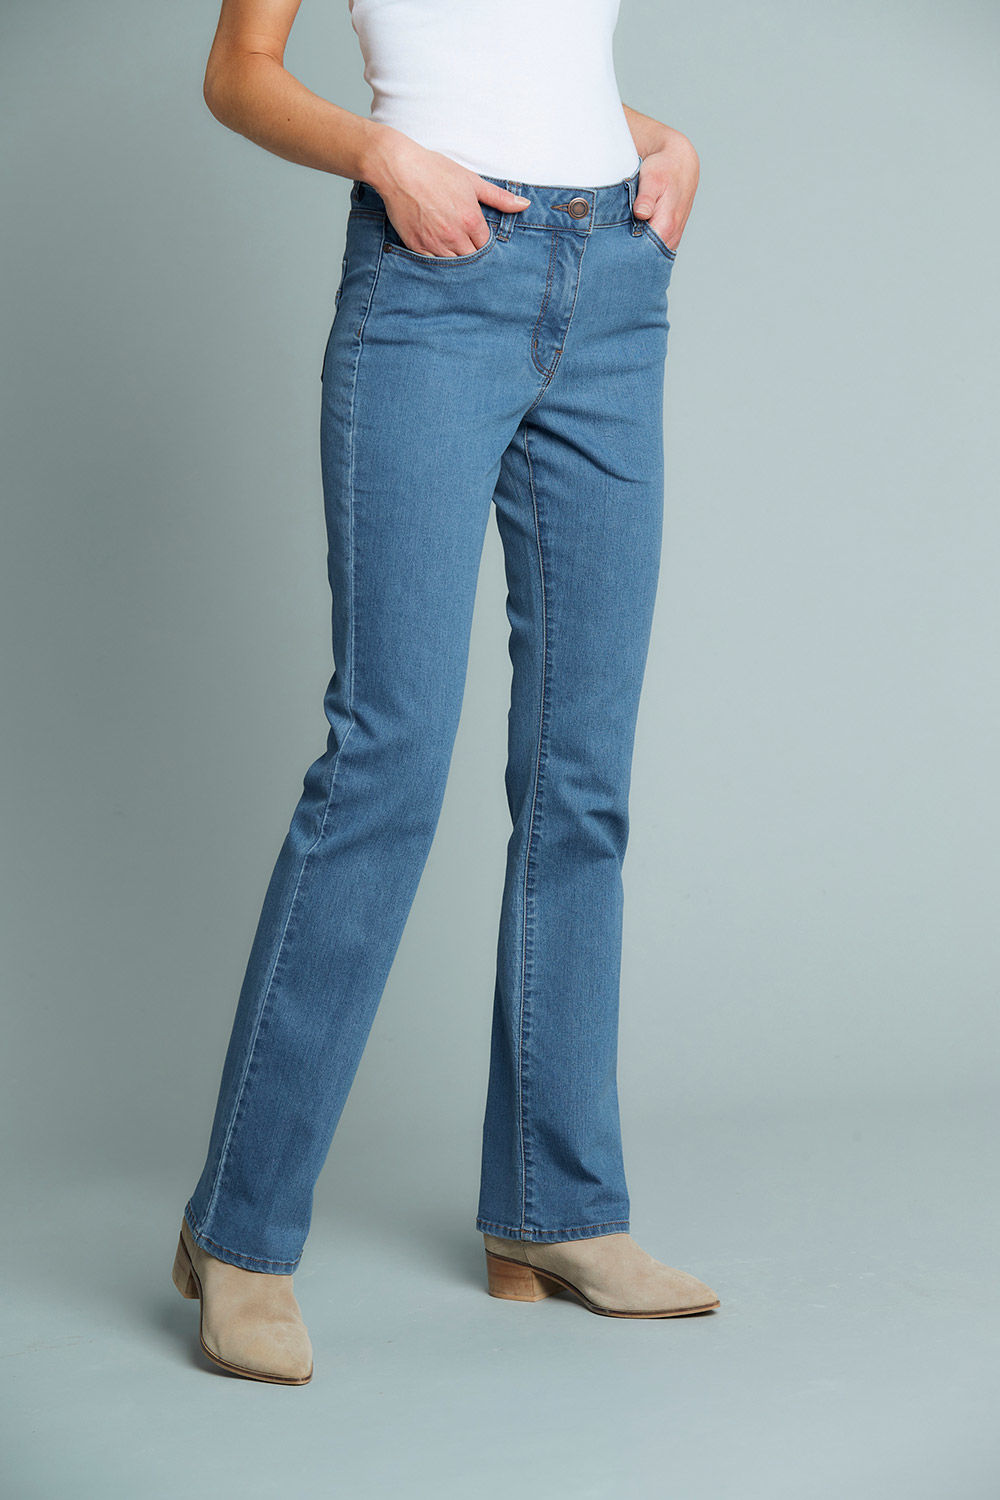 navy jeans womens